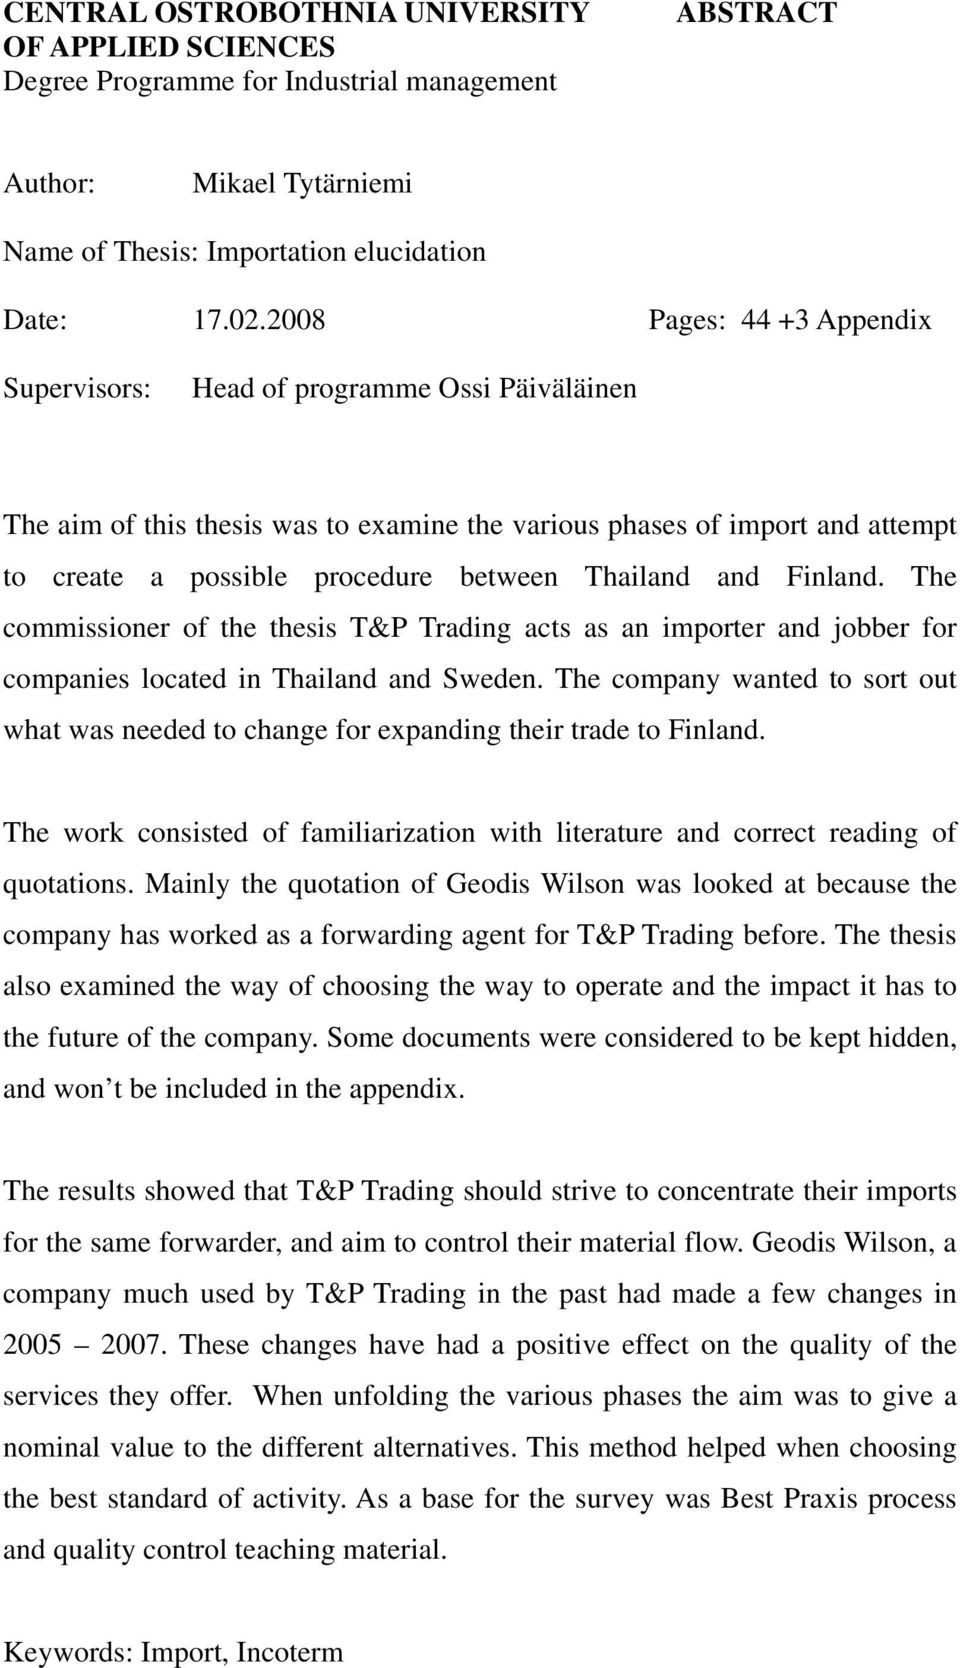 Thailand and Finland. The commissioner of the thesis T&P Trading acts as an importer and jobber for companies located in Thailand and Sweden.